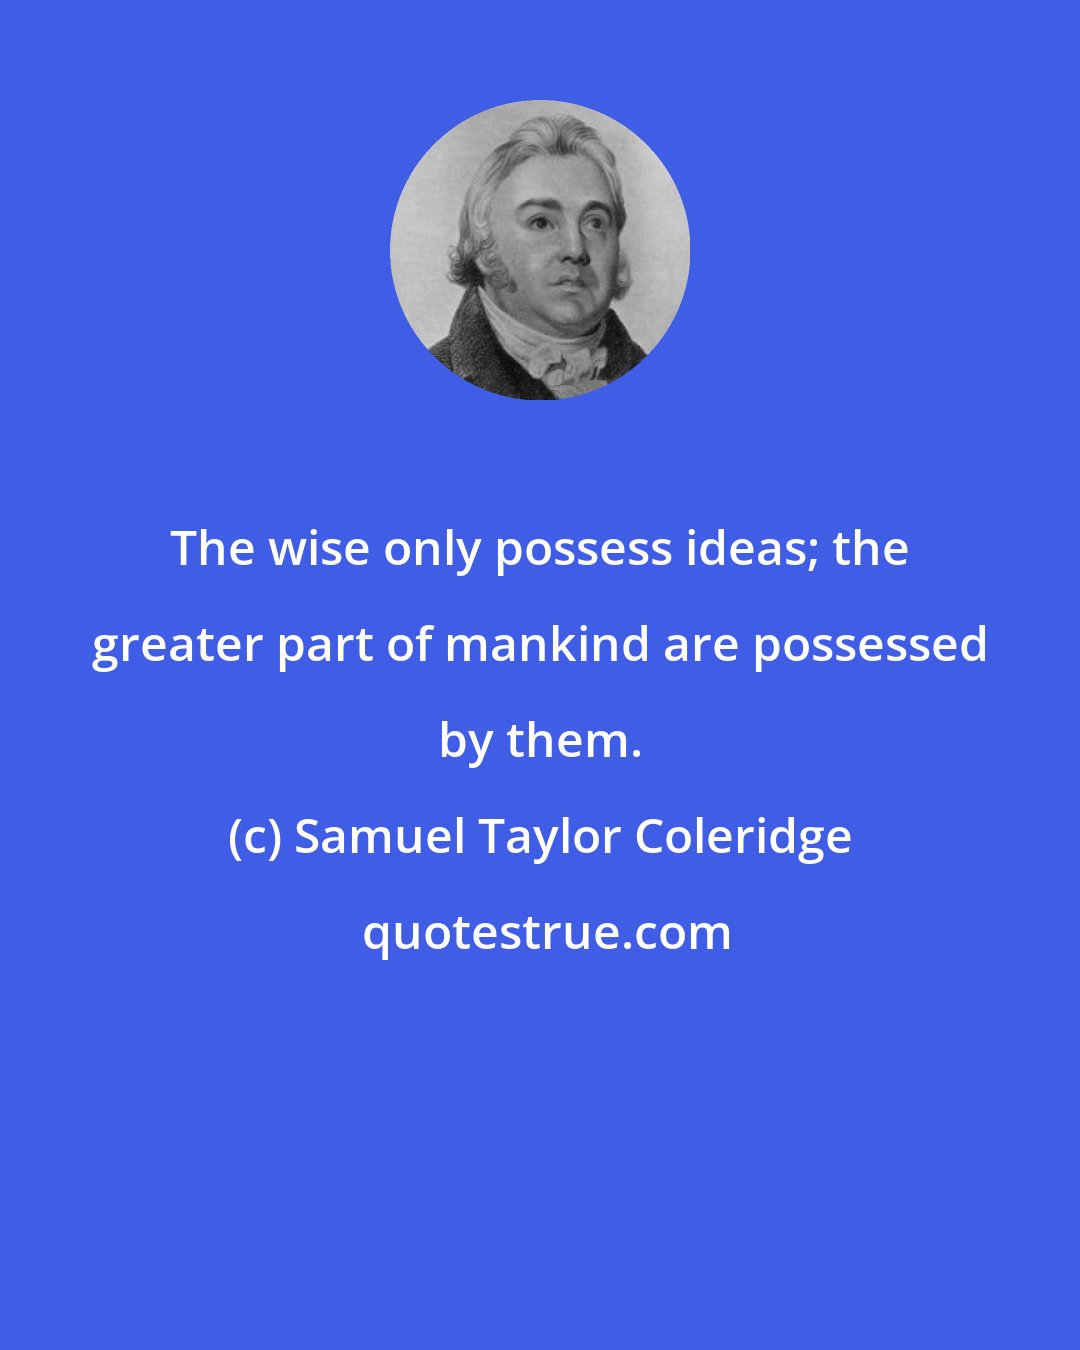 Samuel Taylor Coleridge: The wise only possess ideas; the greater part of mankind are possessed by them.